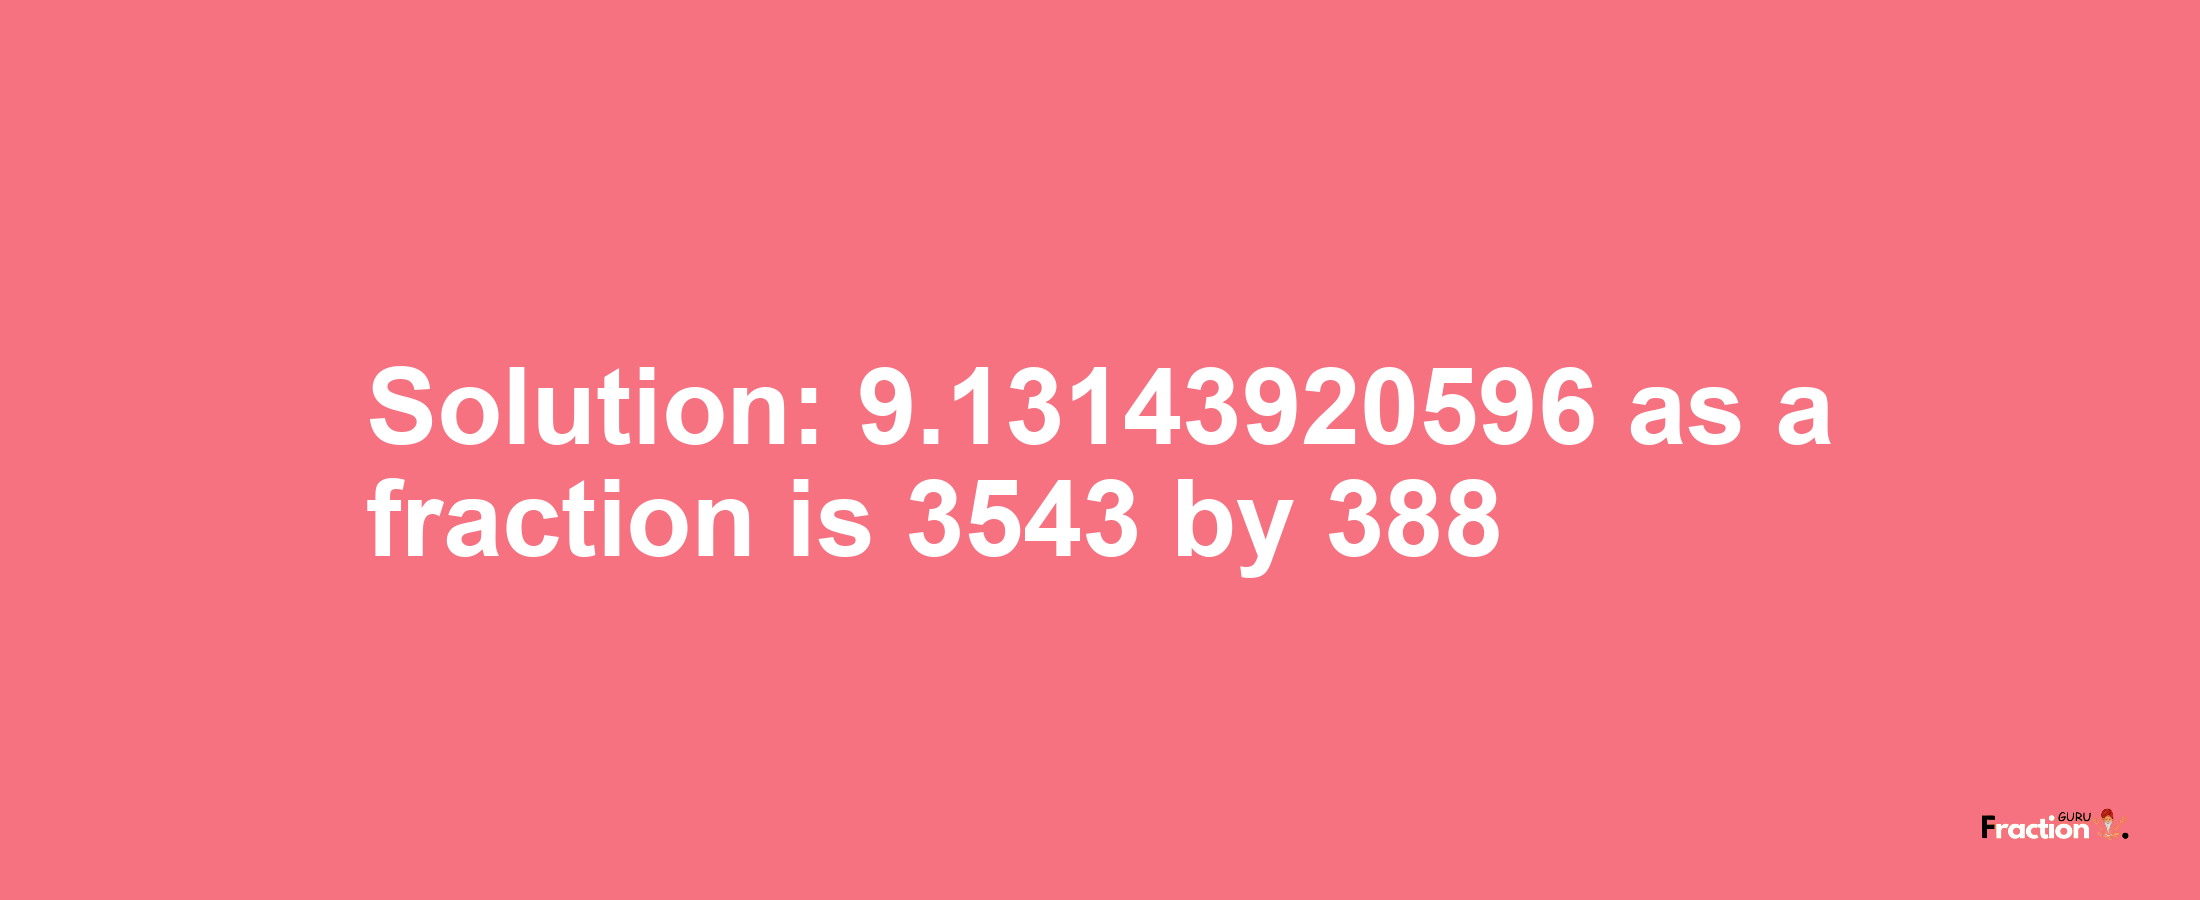 Solution:9.13143920596 as a fraction is 3543/388